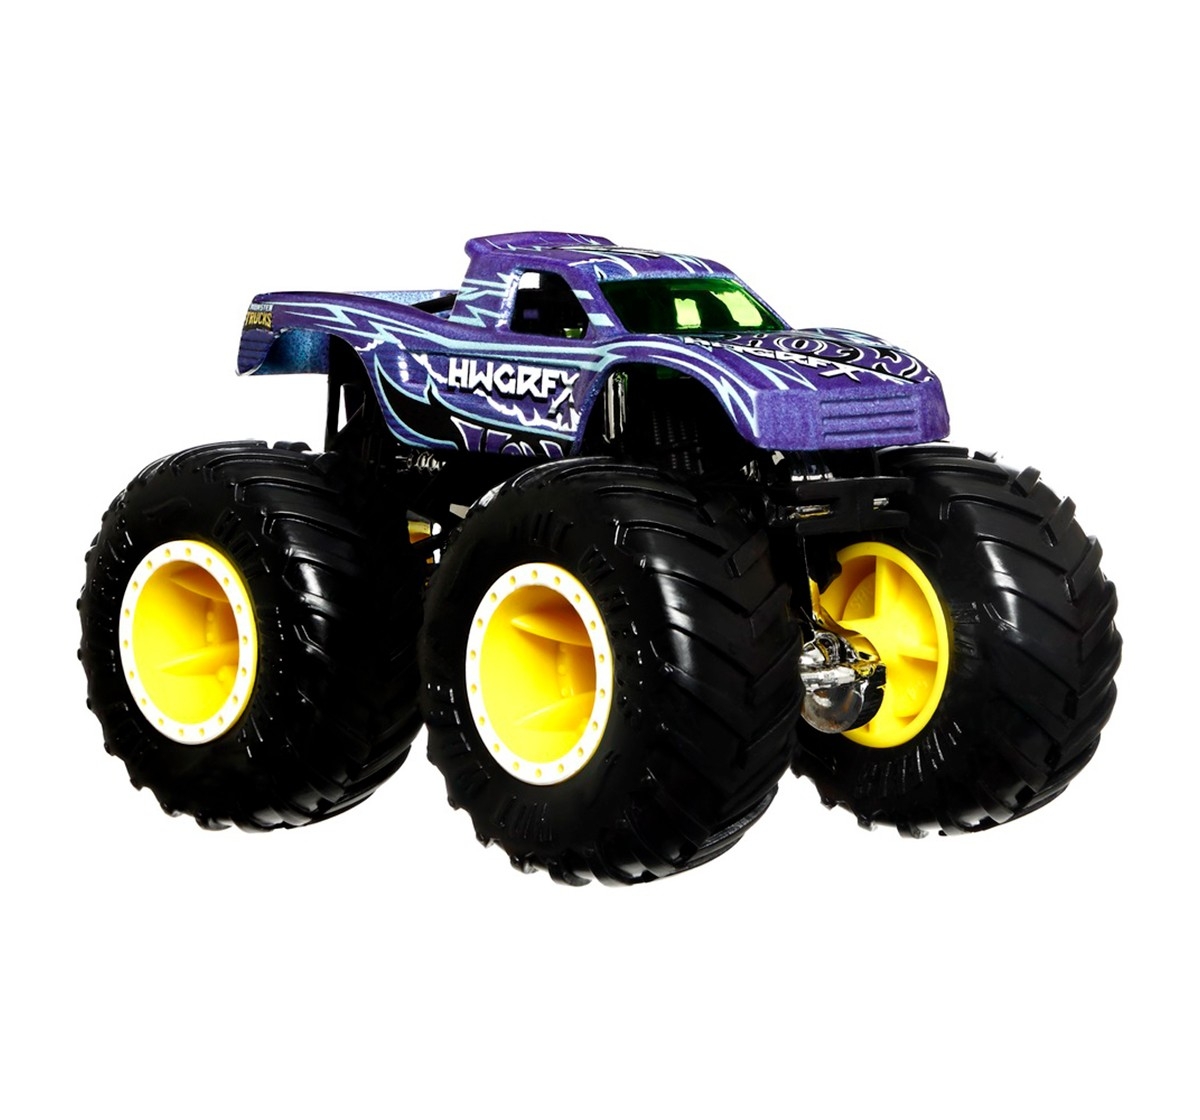 Hot Wheels Monster Truck 1:64 Color Shifter, Assorted, 3Y+, Multicolour